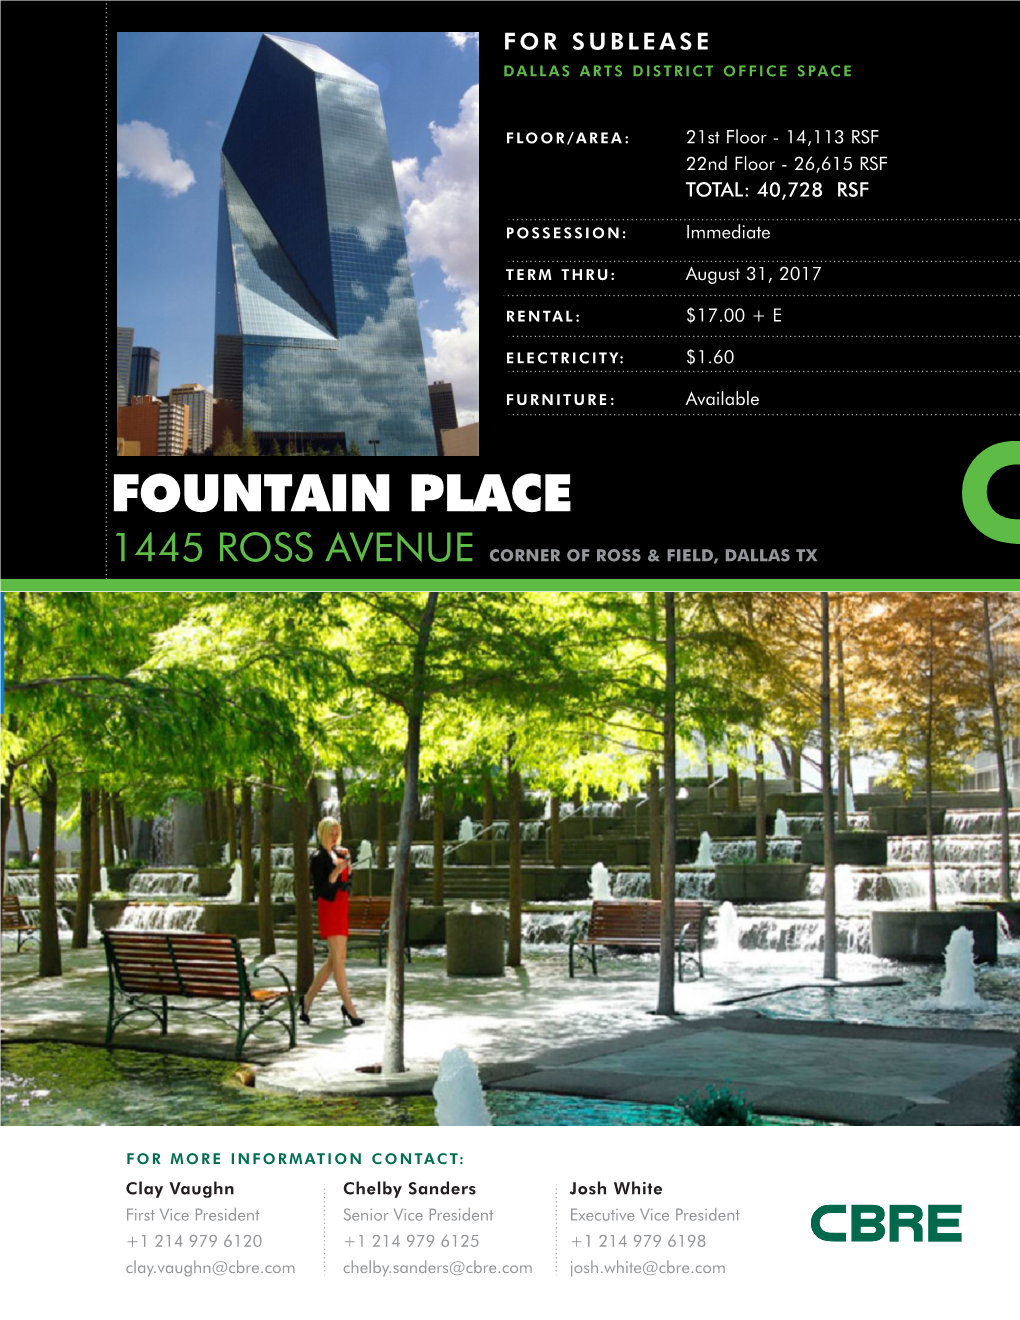 Fountain Place